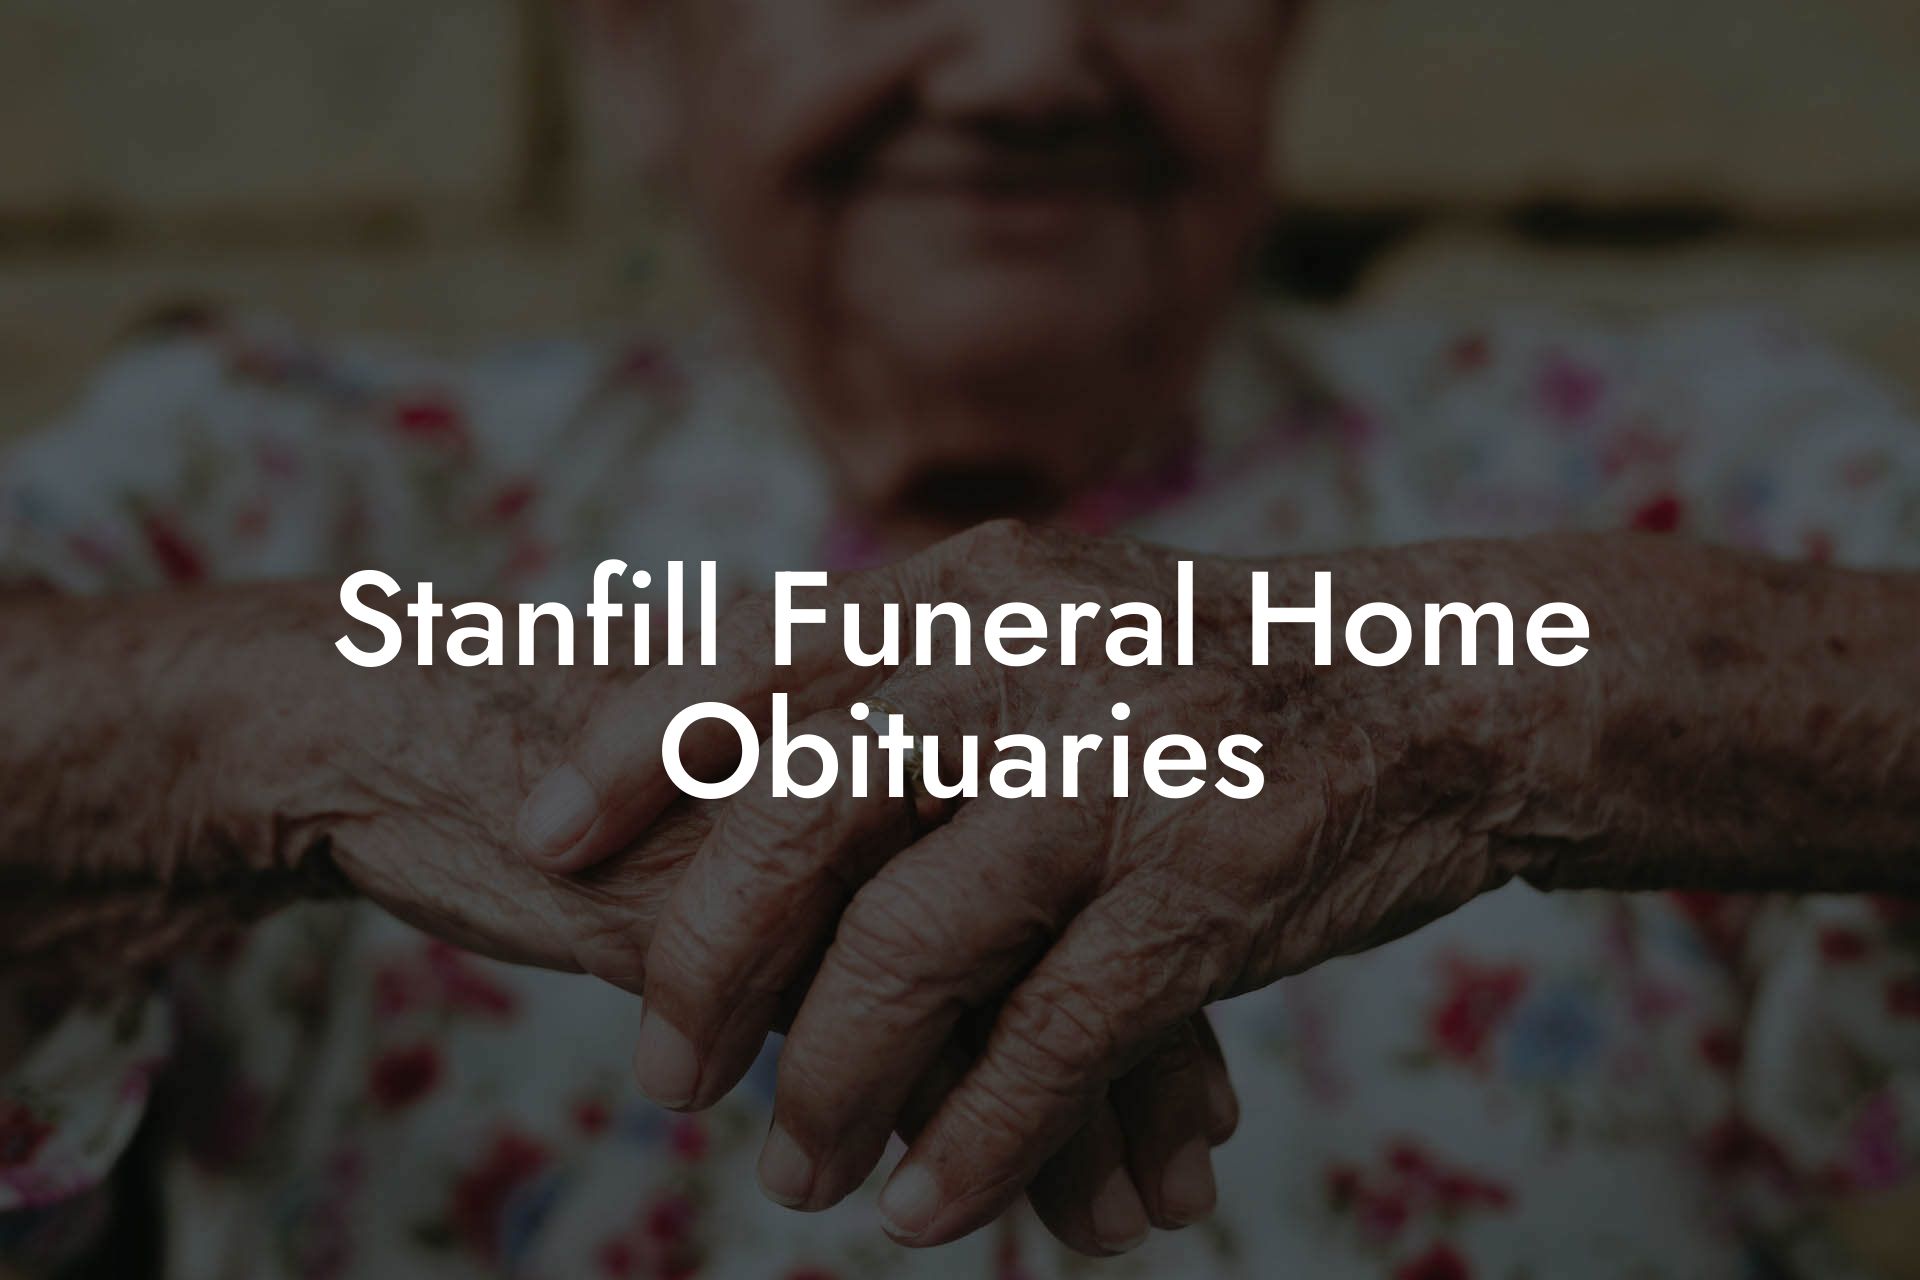 Stanfill Funeral Home Obituaries